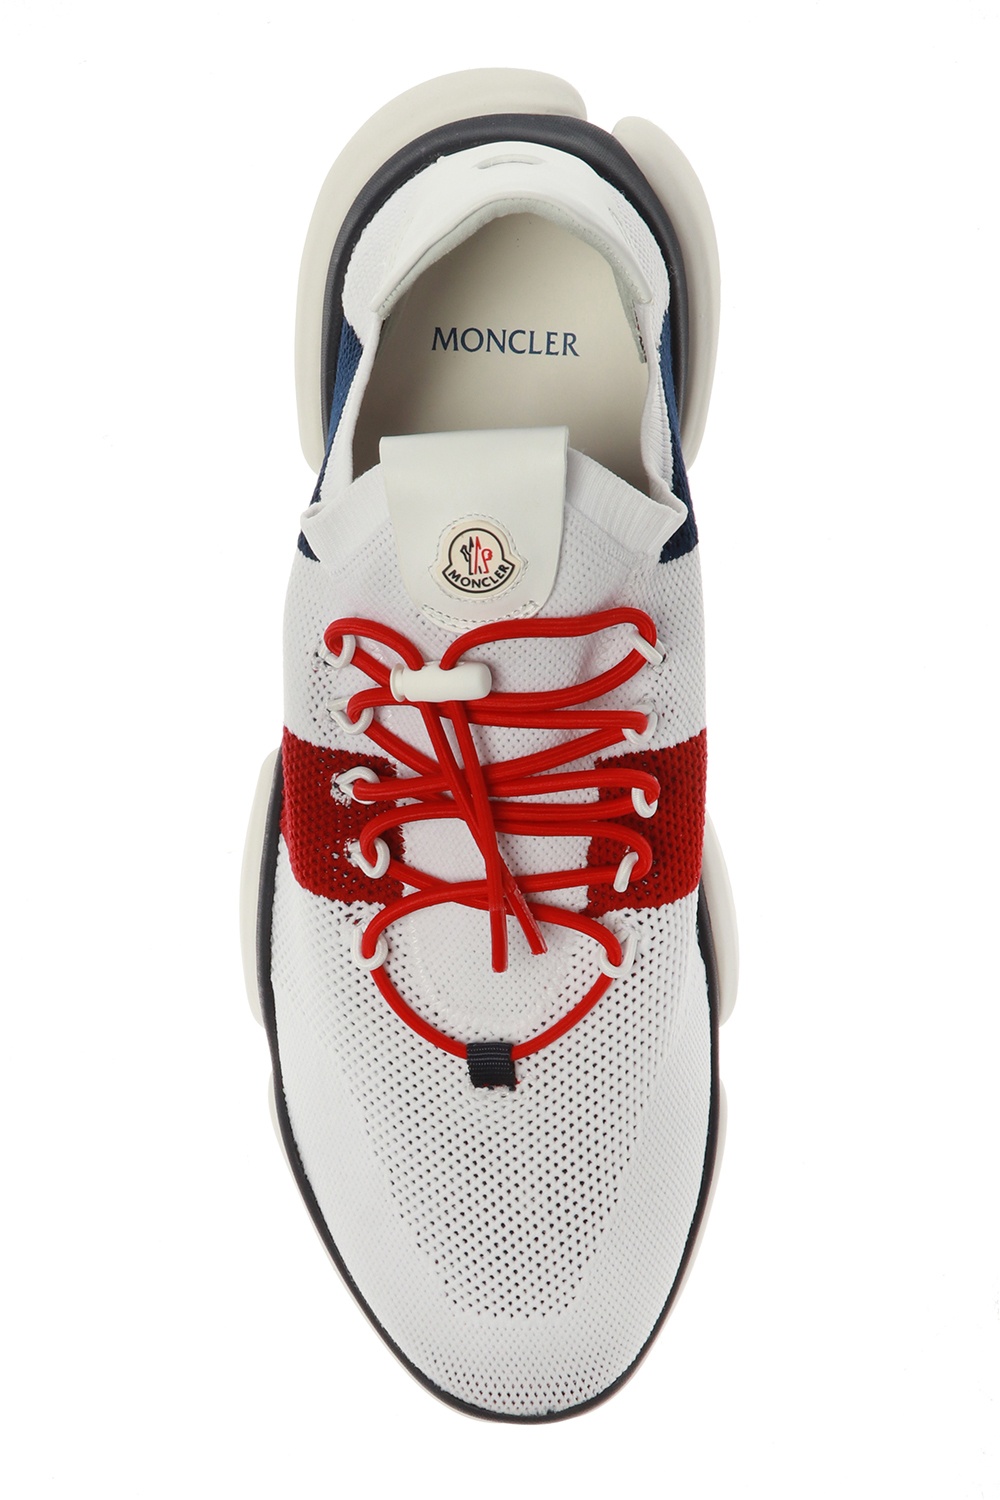 Moncler White, Red & Blue Bubble Sneakers